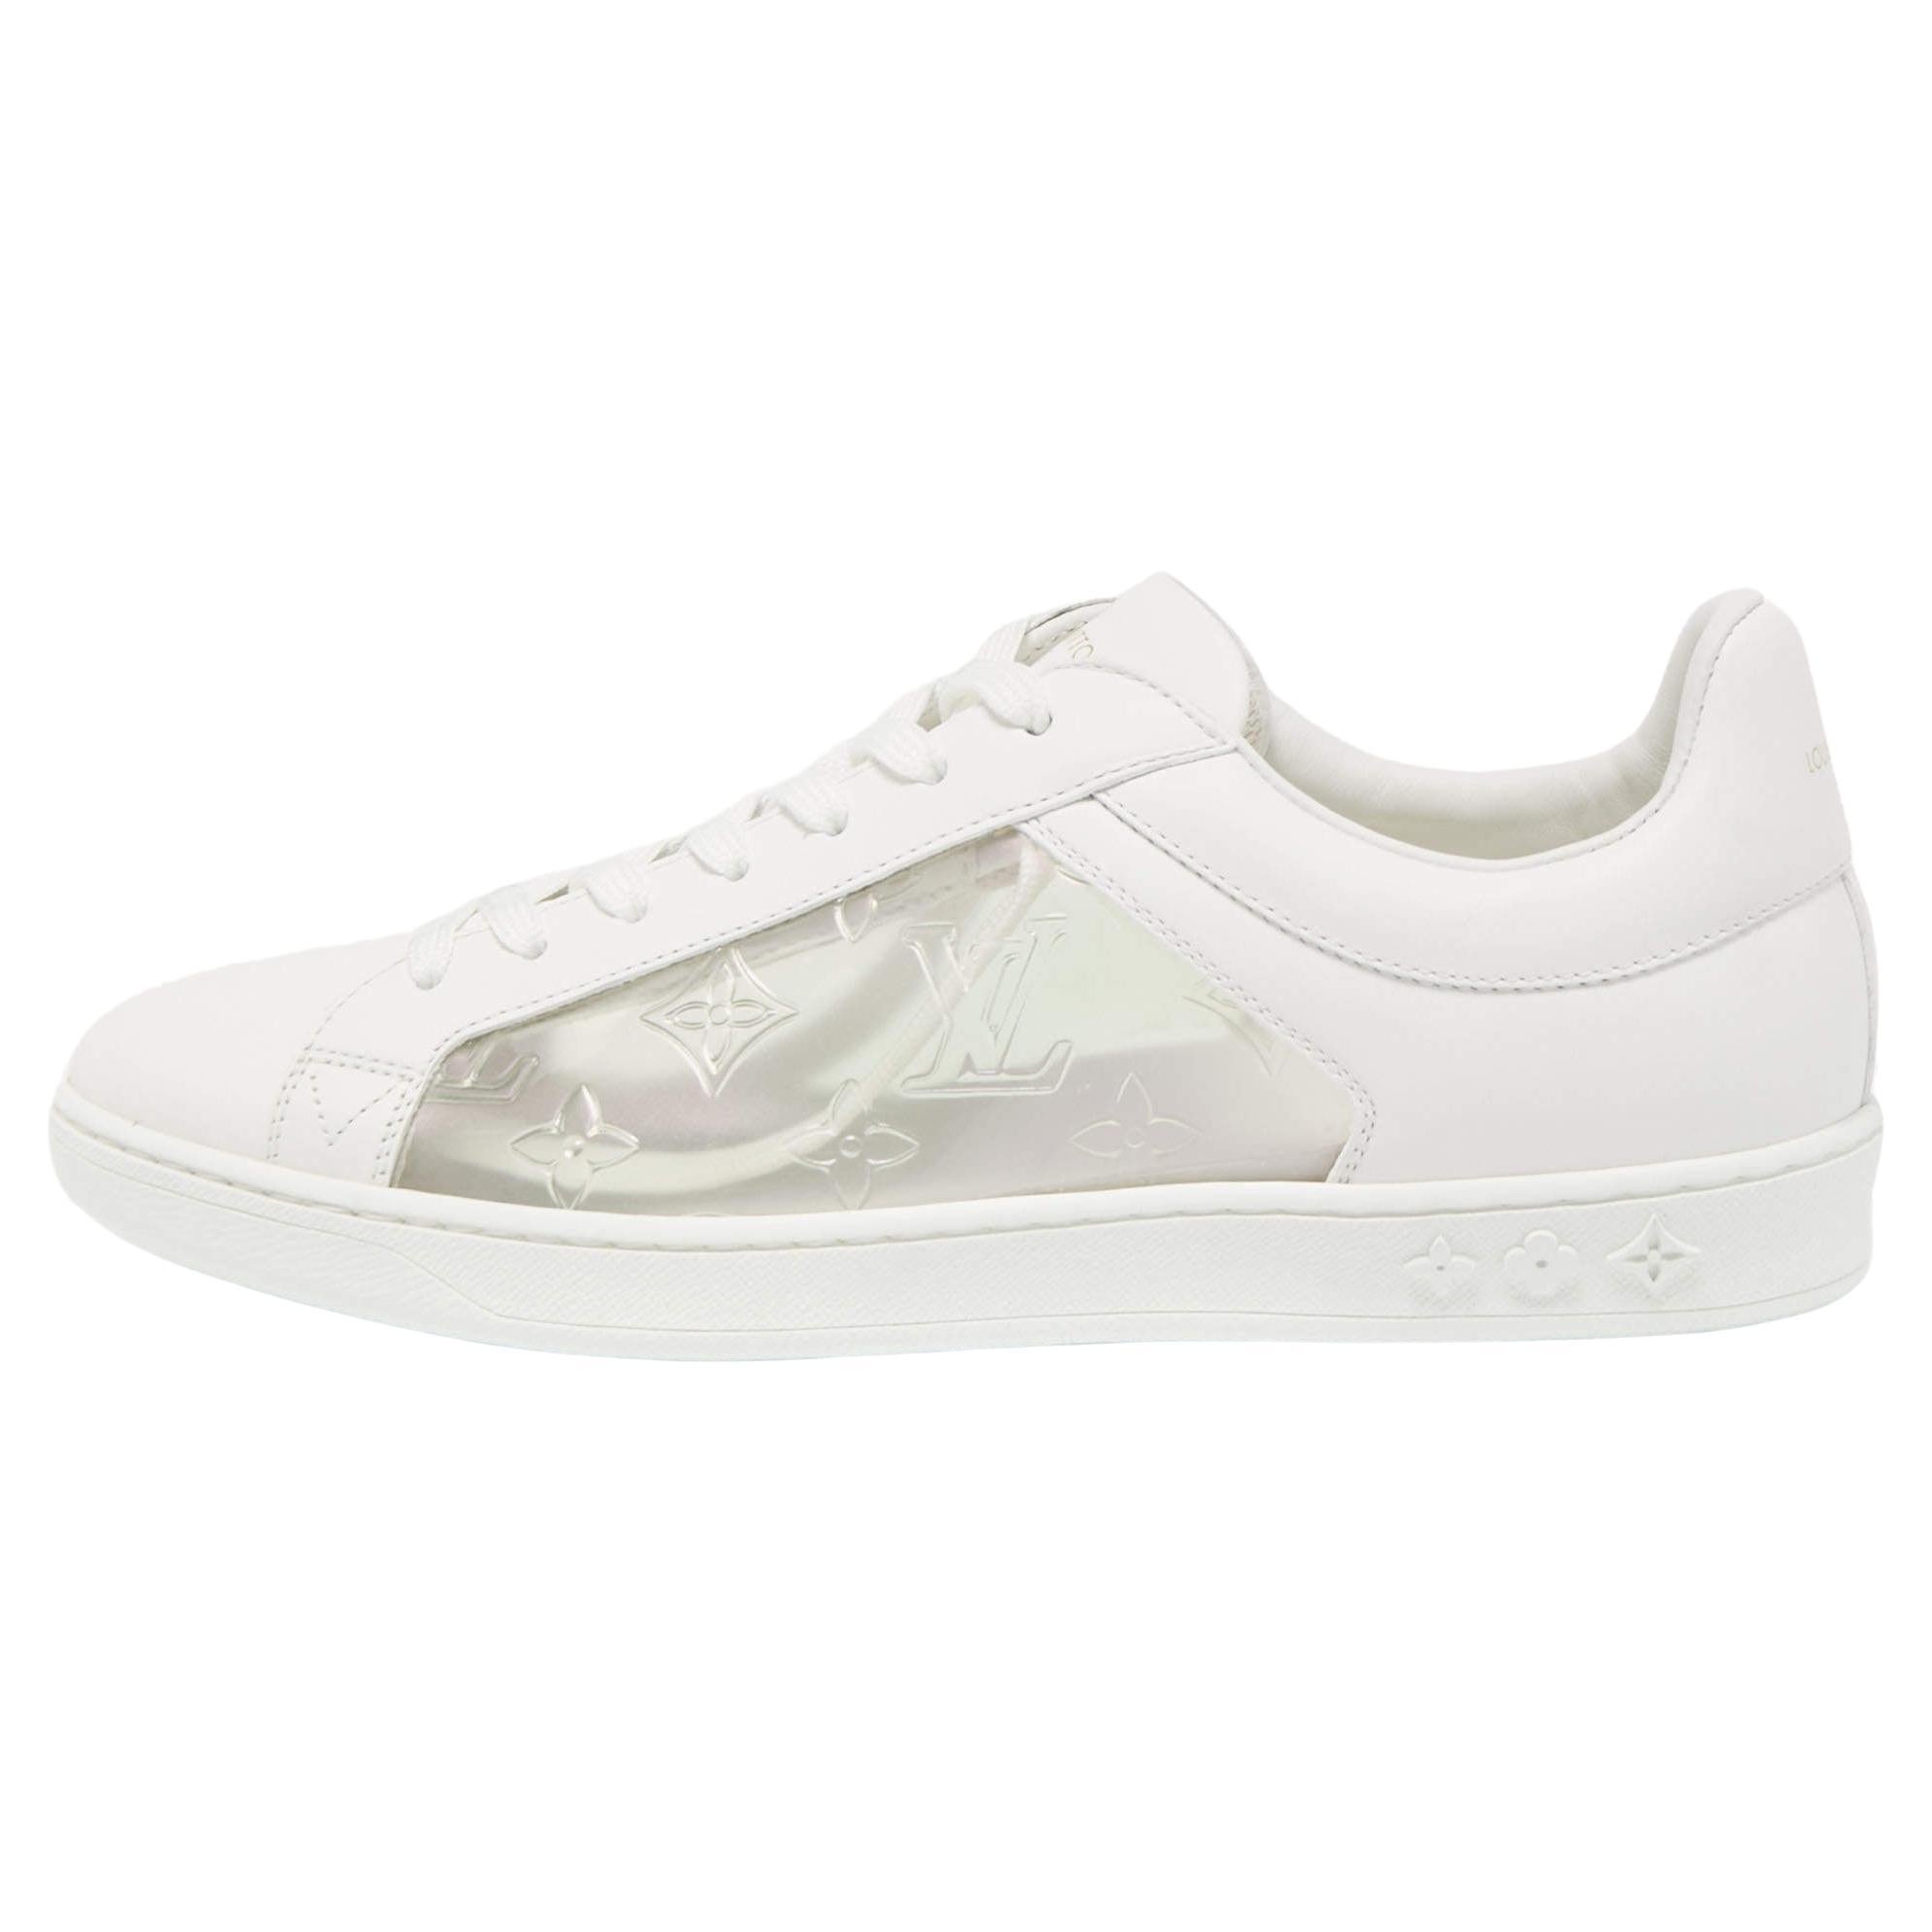 Louis Vuitton White Leather and PVC Low Top Sneakers Size 41